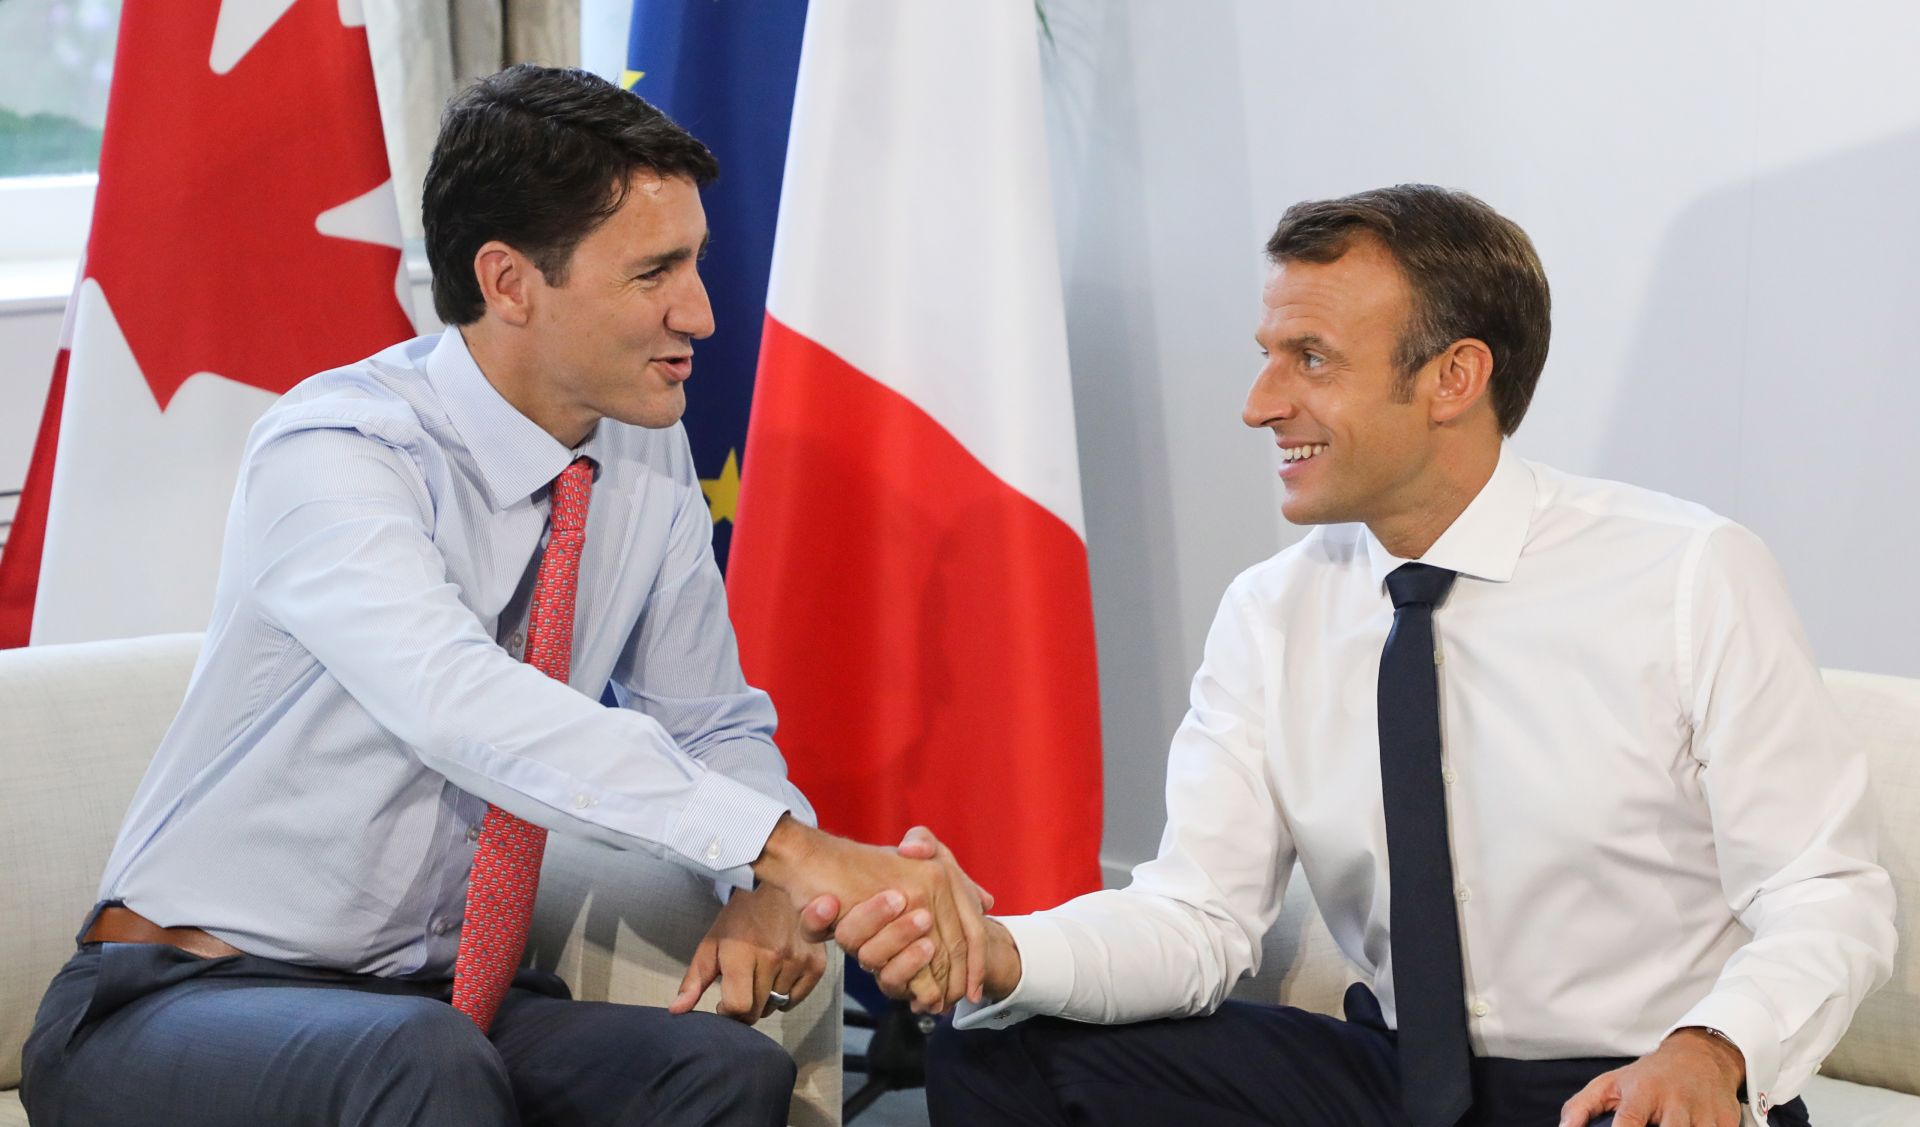 epa07794583 Canadian Prime Minister Justin Trudeau (L) shakes hands with French President Emmanuel Macron during a bilateral meeting in Biarritz, south-west France, 26 August 2019. The G7 Summit runs from 24 to 26 August in Biarritz.  EPA/LUDOVIC MARIN / POOL  MAXPPP OUT